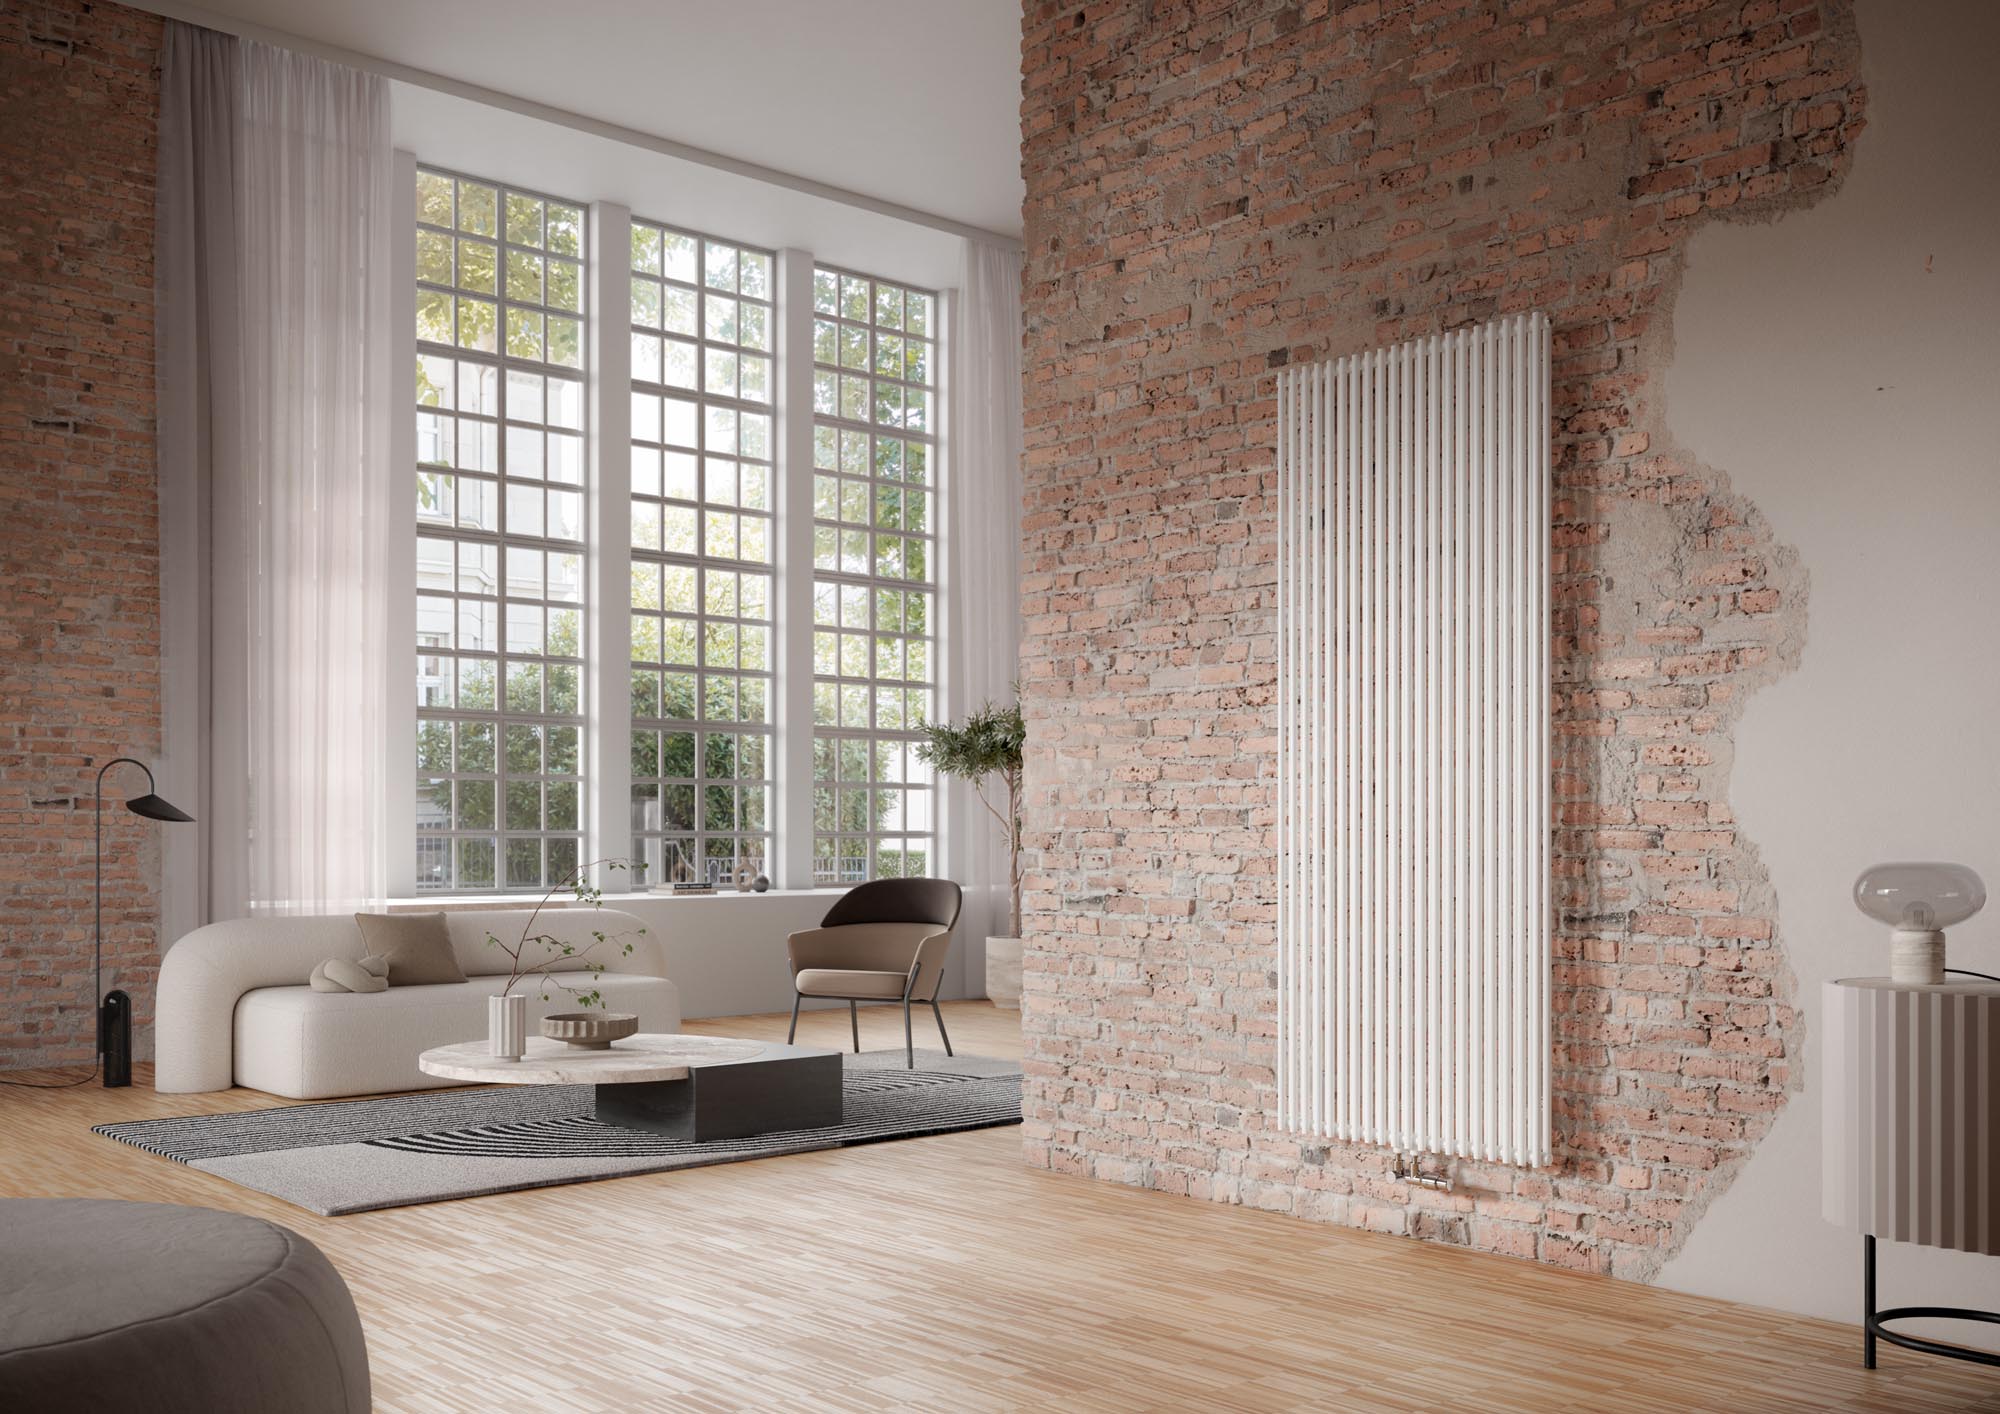 Kermi Pio designer and bathroom radiators for all residential and property projects.